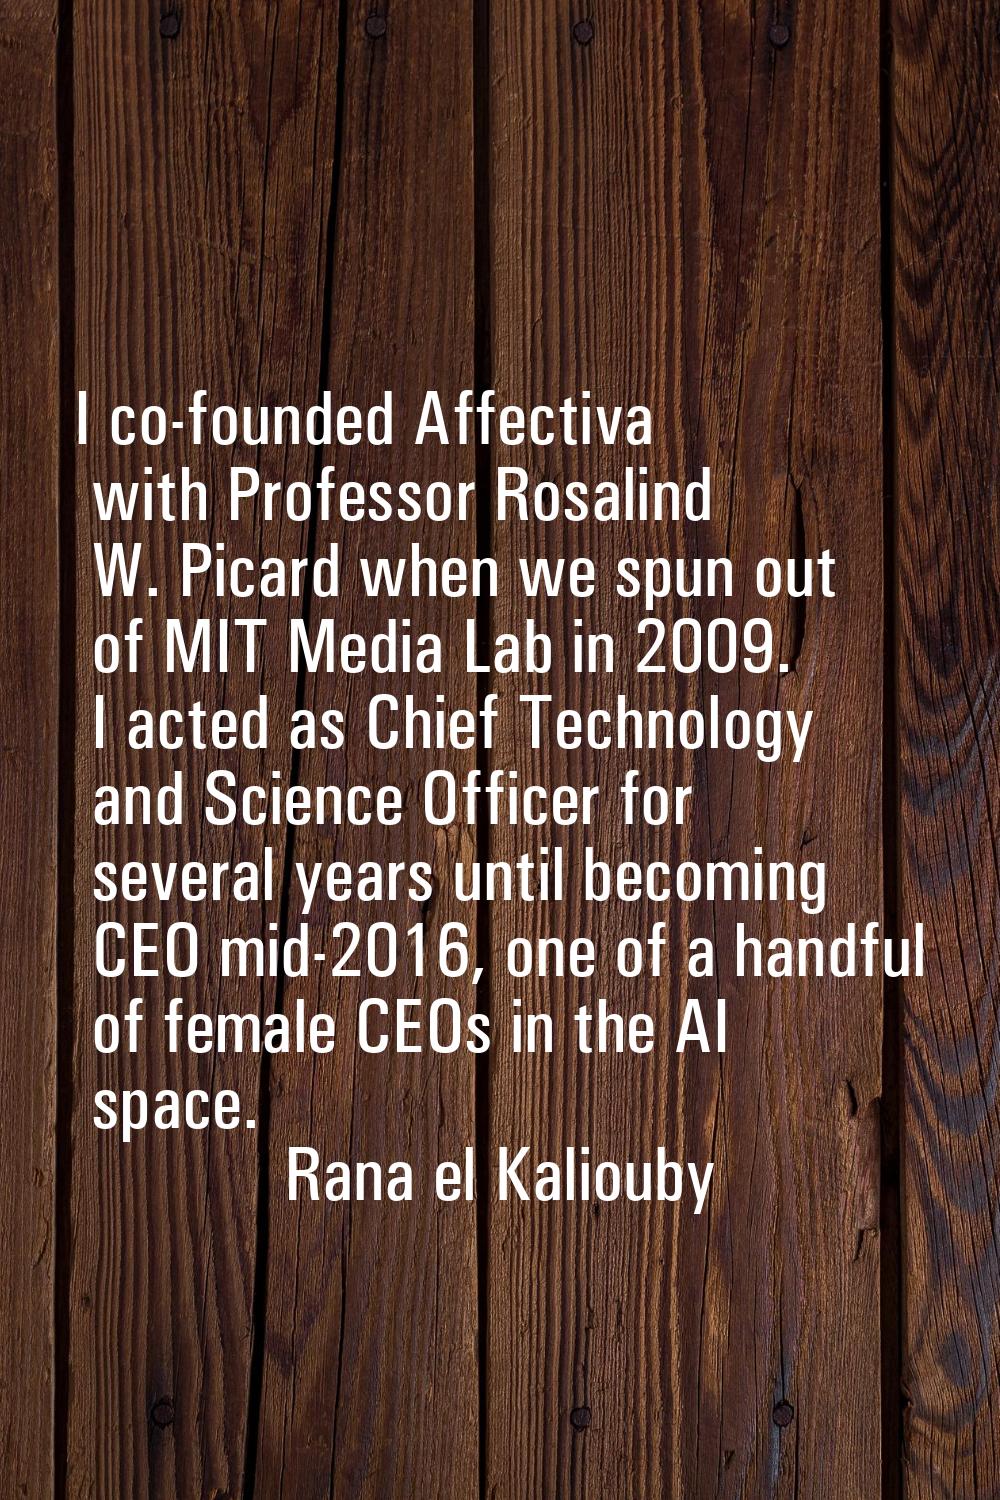 I co-founded Affectiva with Professor Rosalind W. Picard when we spun out of MIT Media Lab in 2009.